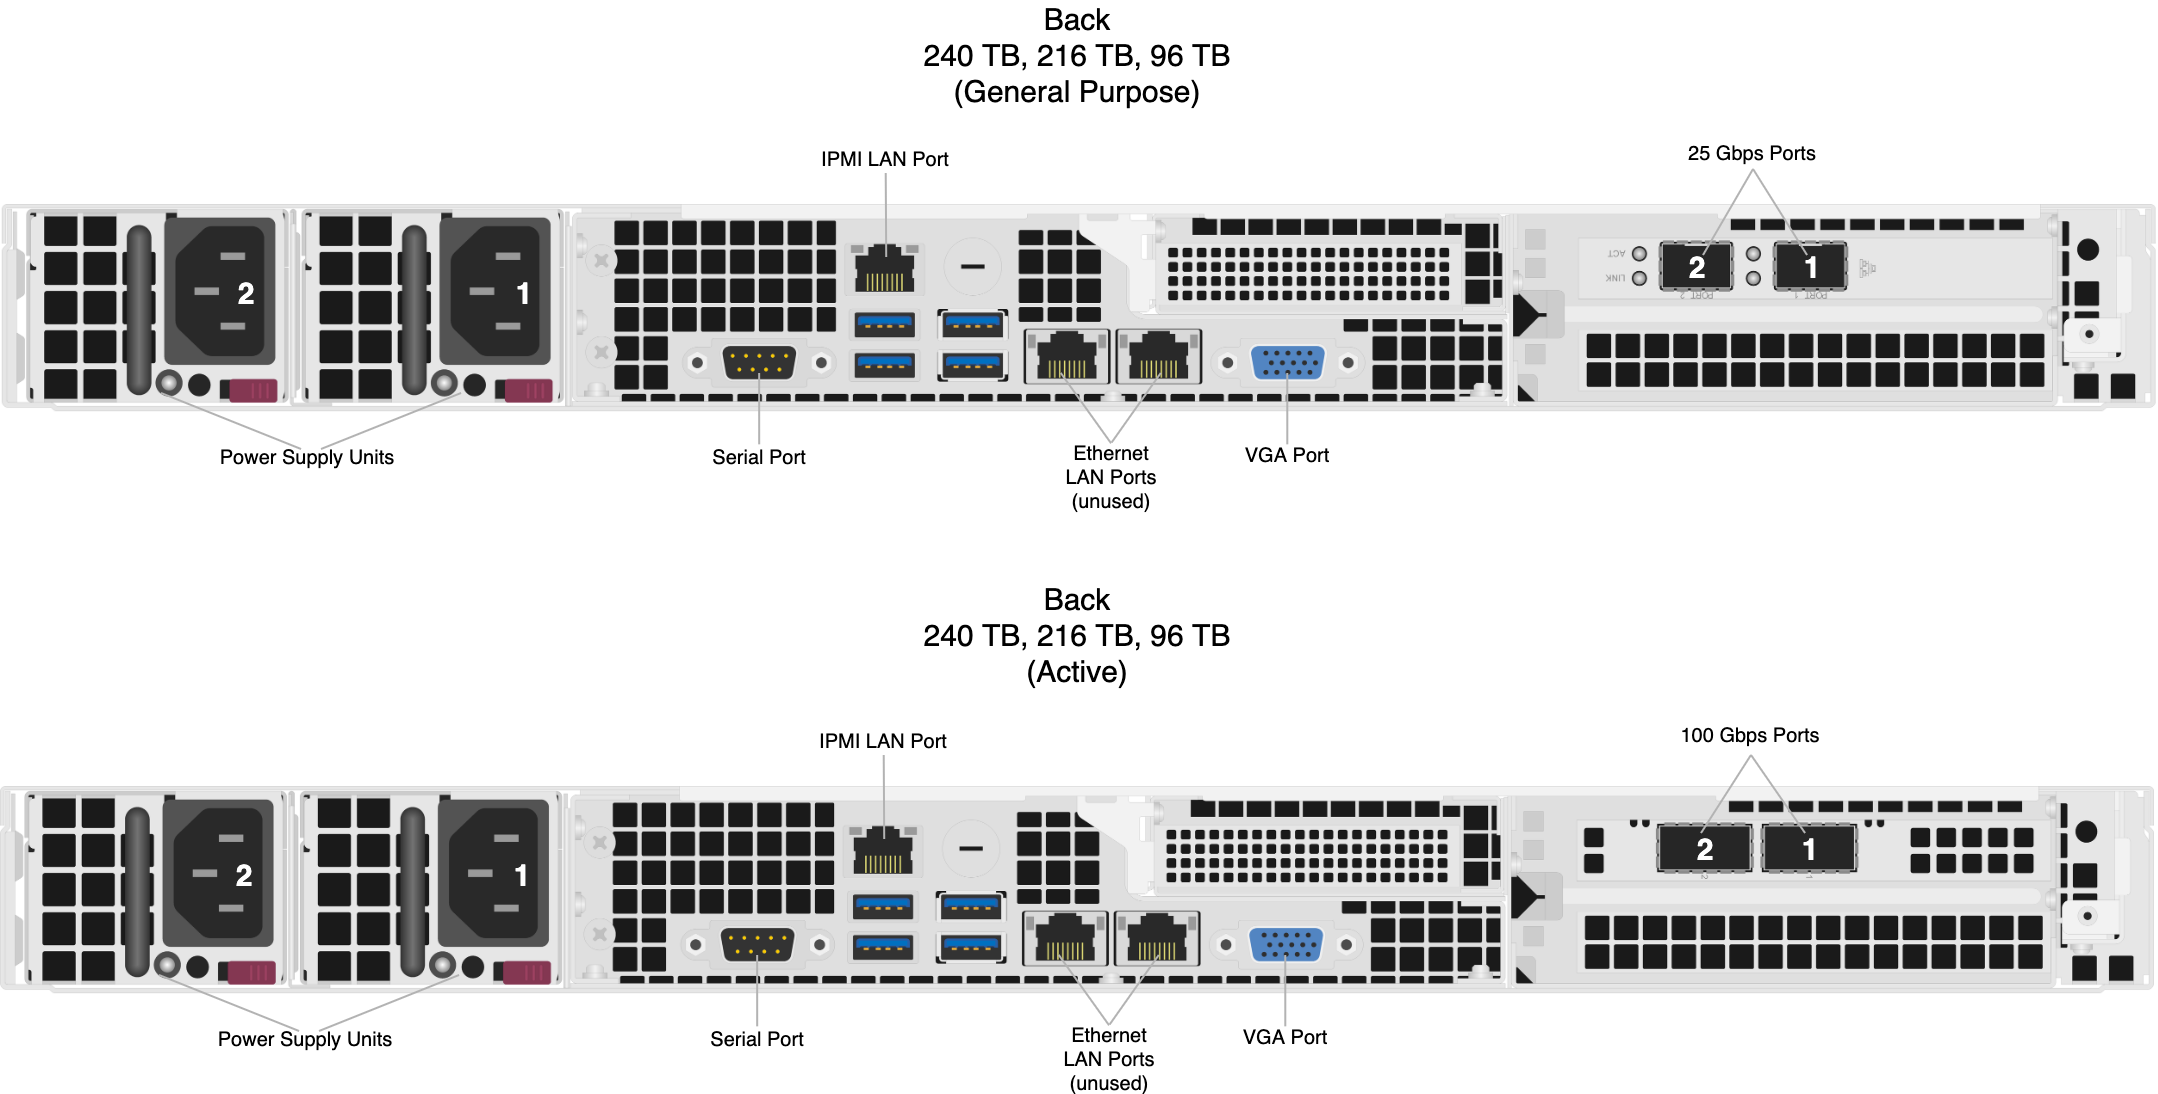 Back Diagram of the Supermicro A+ ASG-1014S-ACR12N4H Node